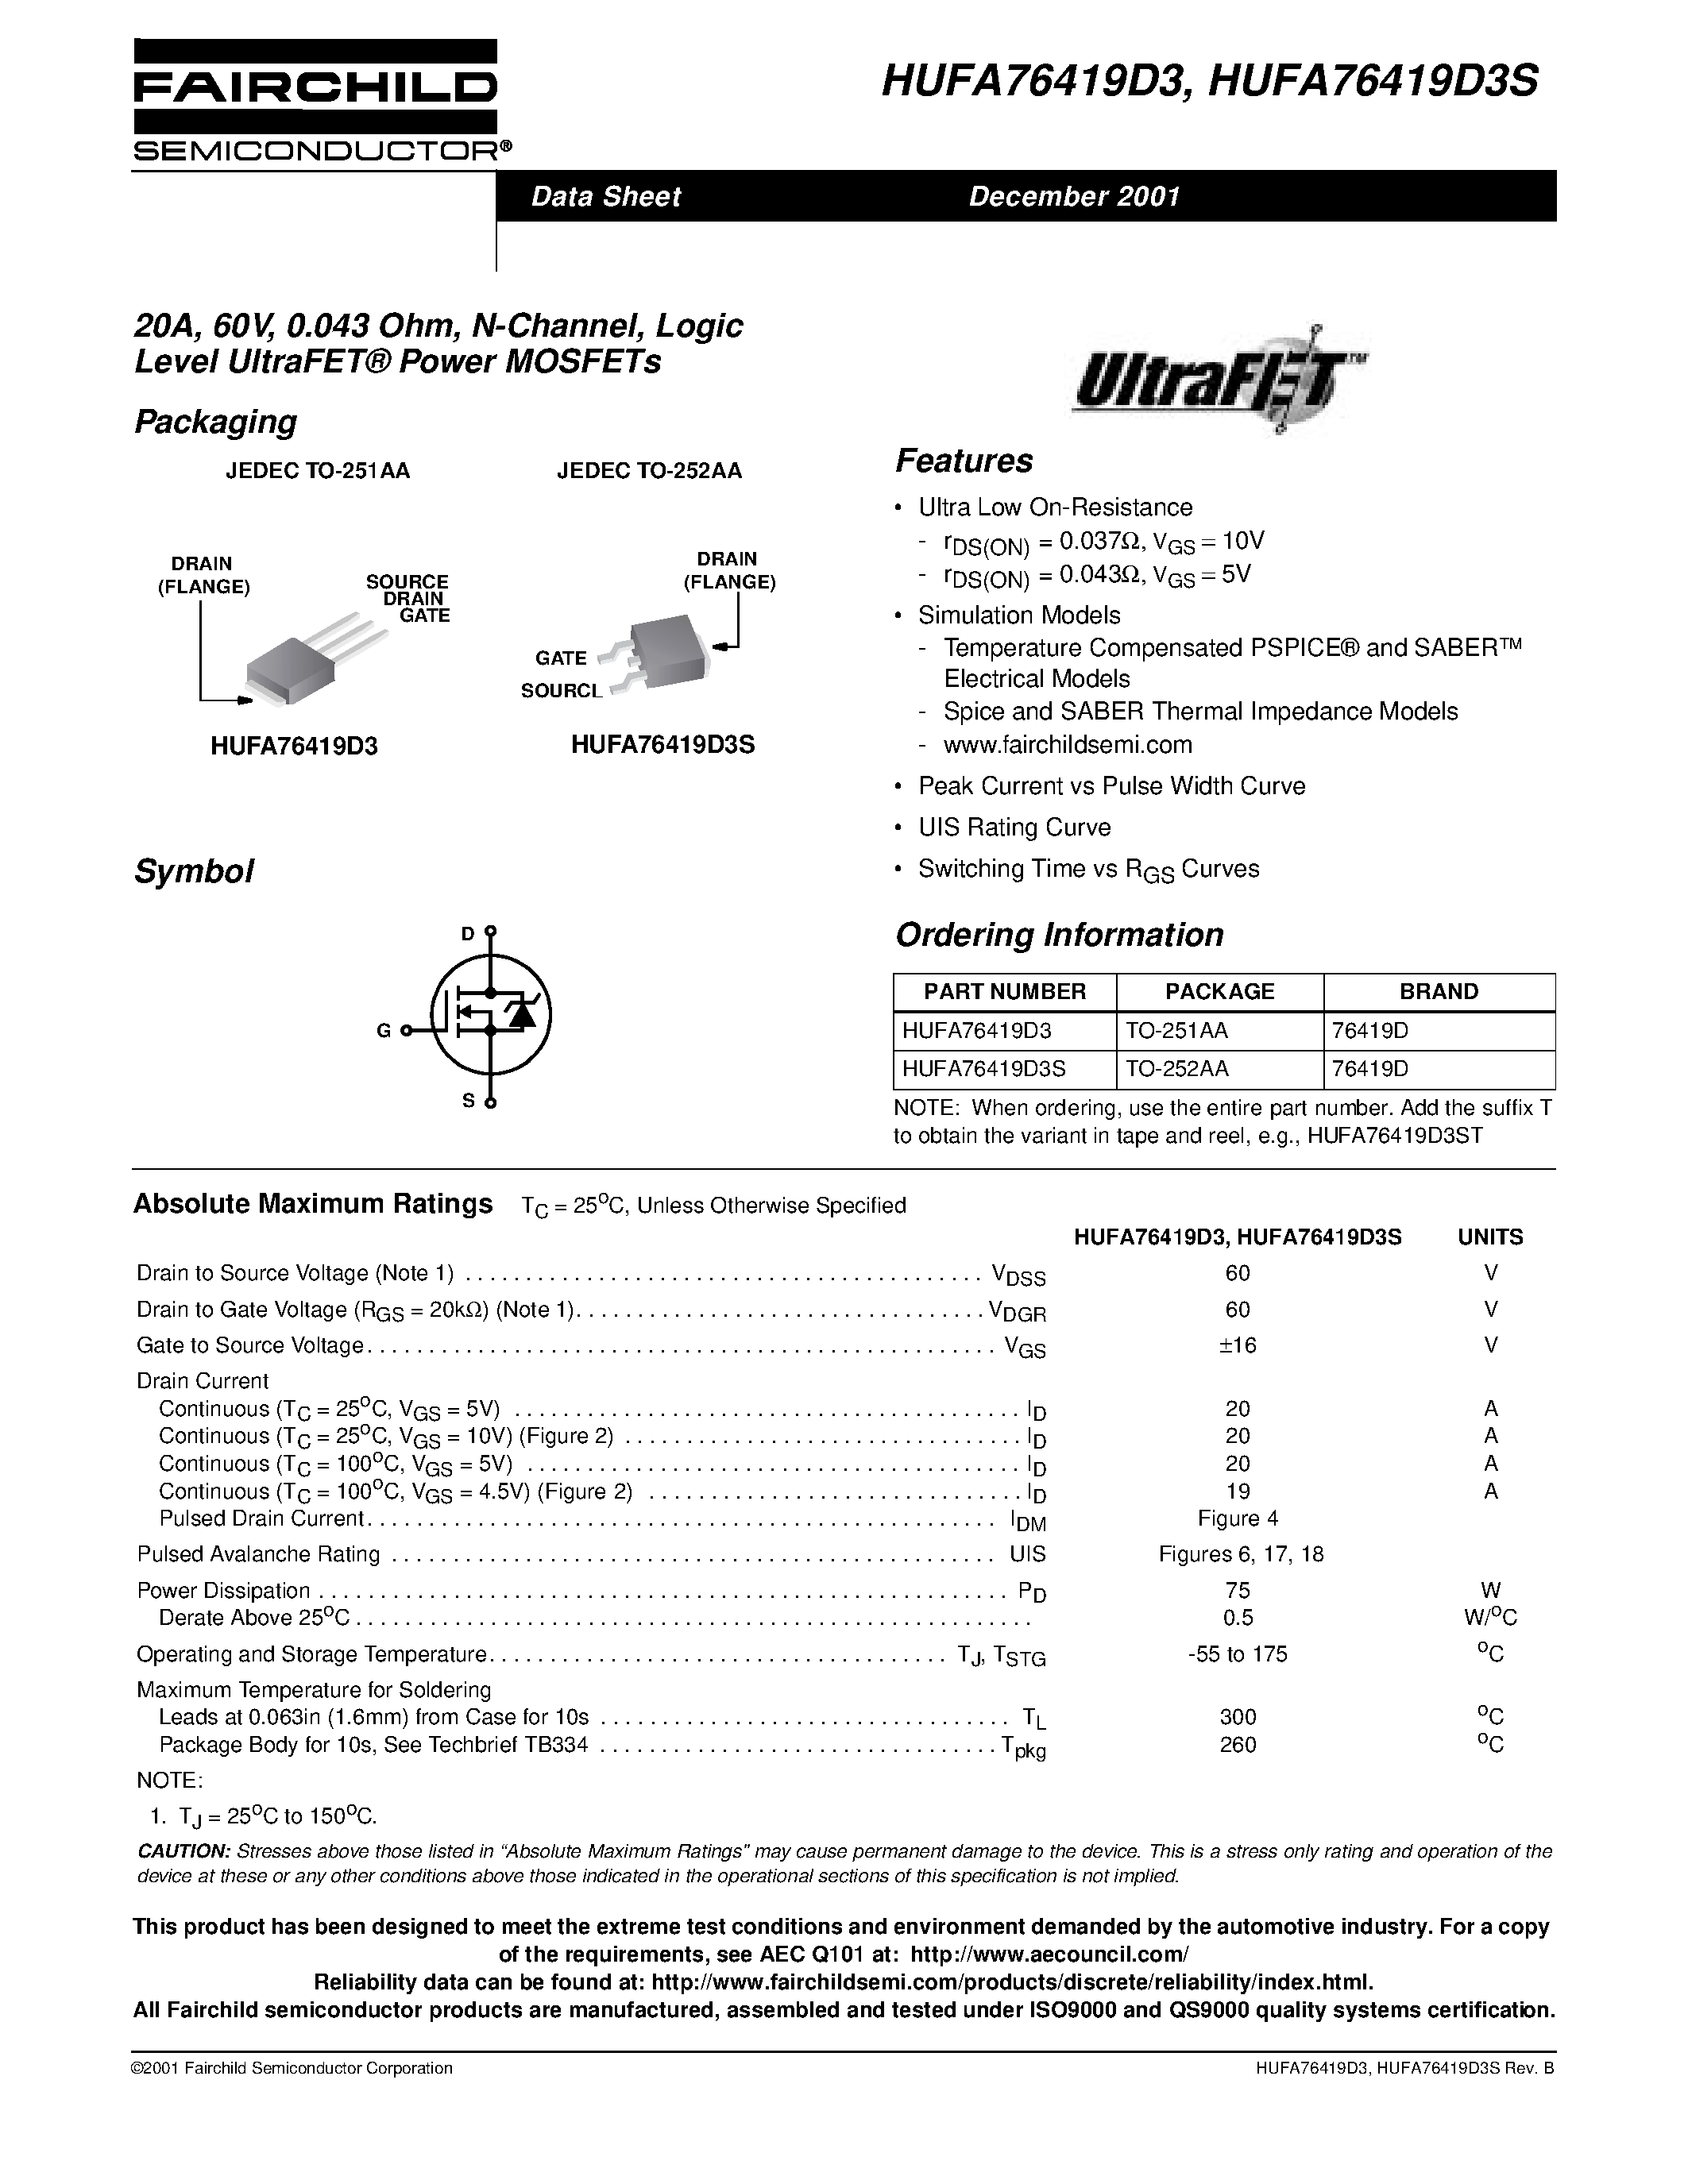 Datasheet HUFA76419D3S - 20A/ 60V/ 0.043 Ohm/ N-Channel/ Logic Level UltraFET Power MOSFETs page 1